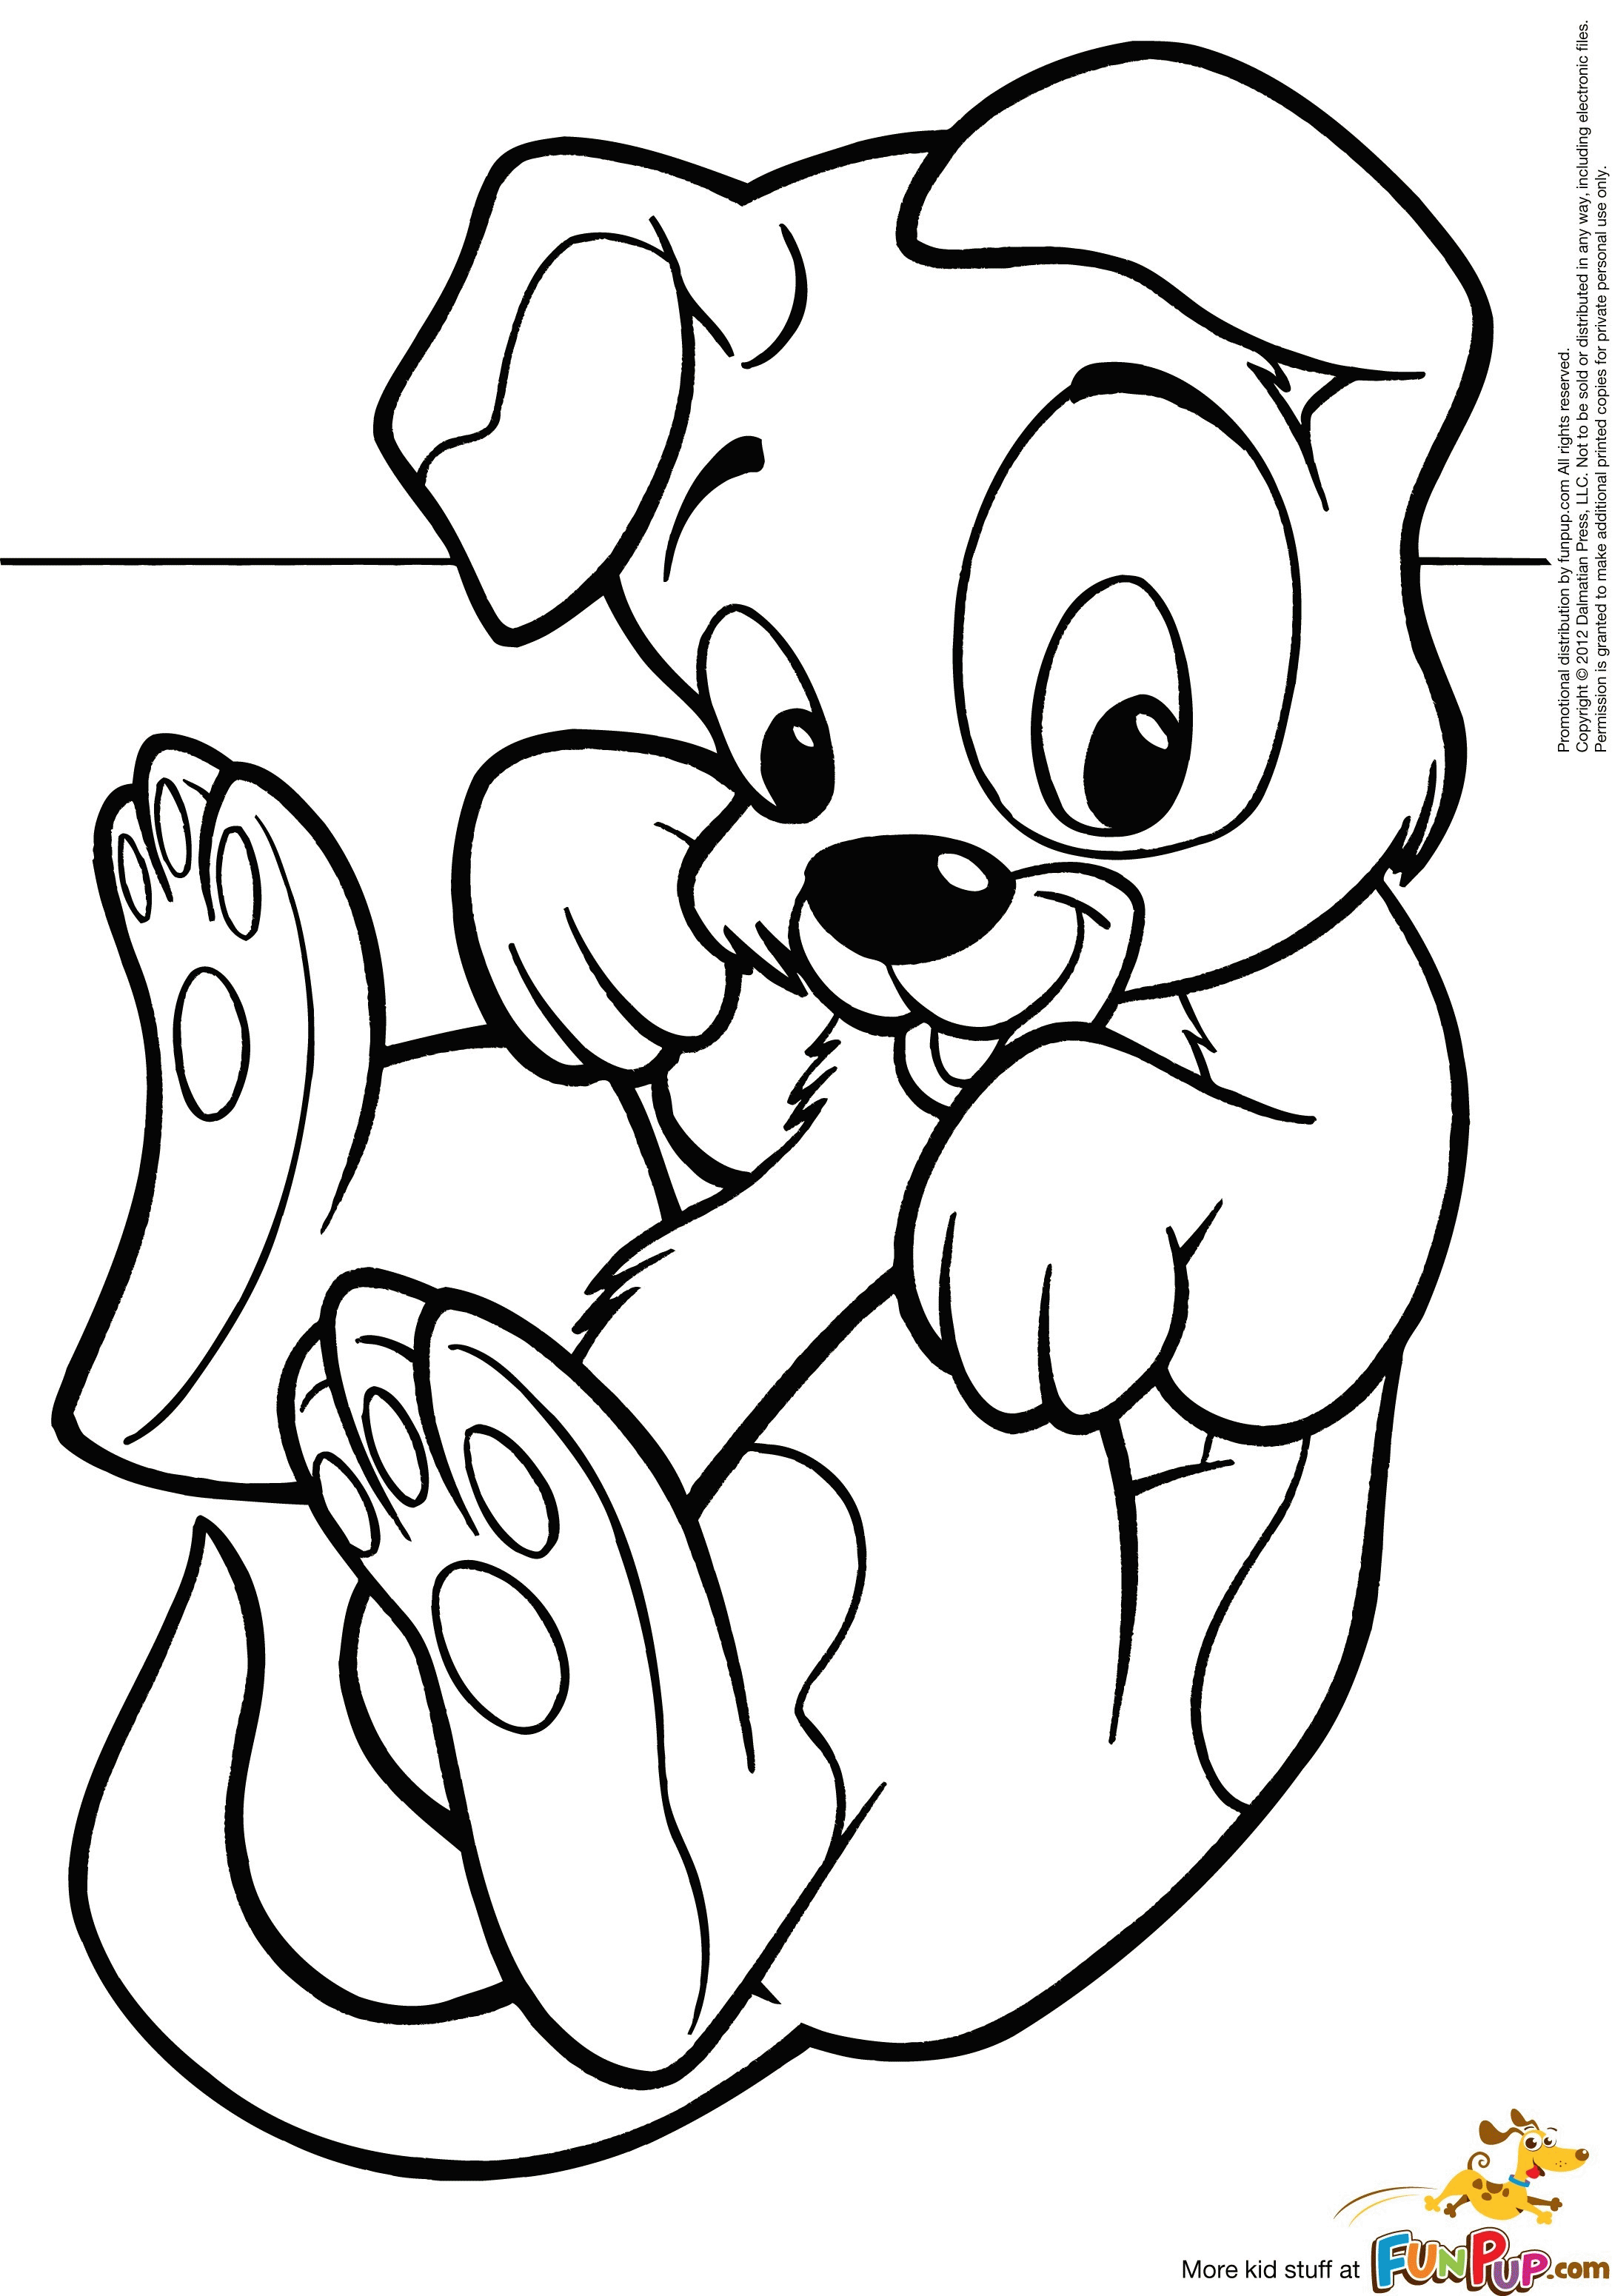 marvelous Puppy Coloring Pages : Coloring Pictures - Ducoloring.com